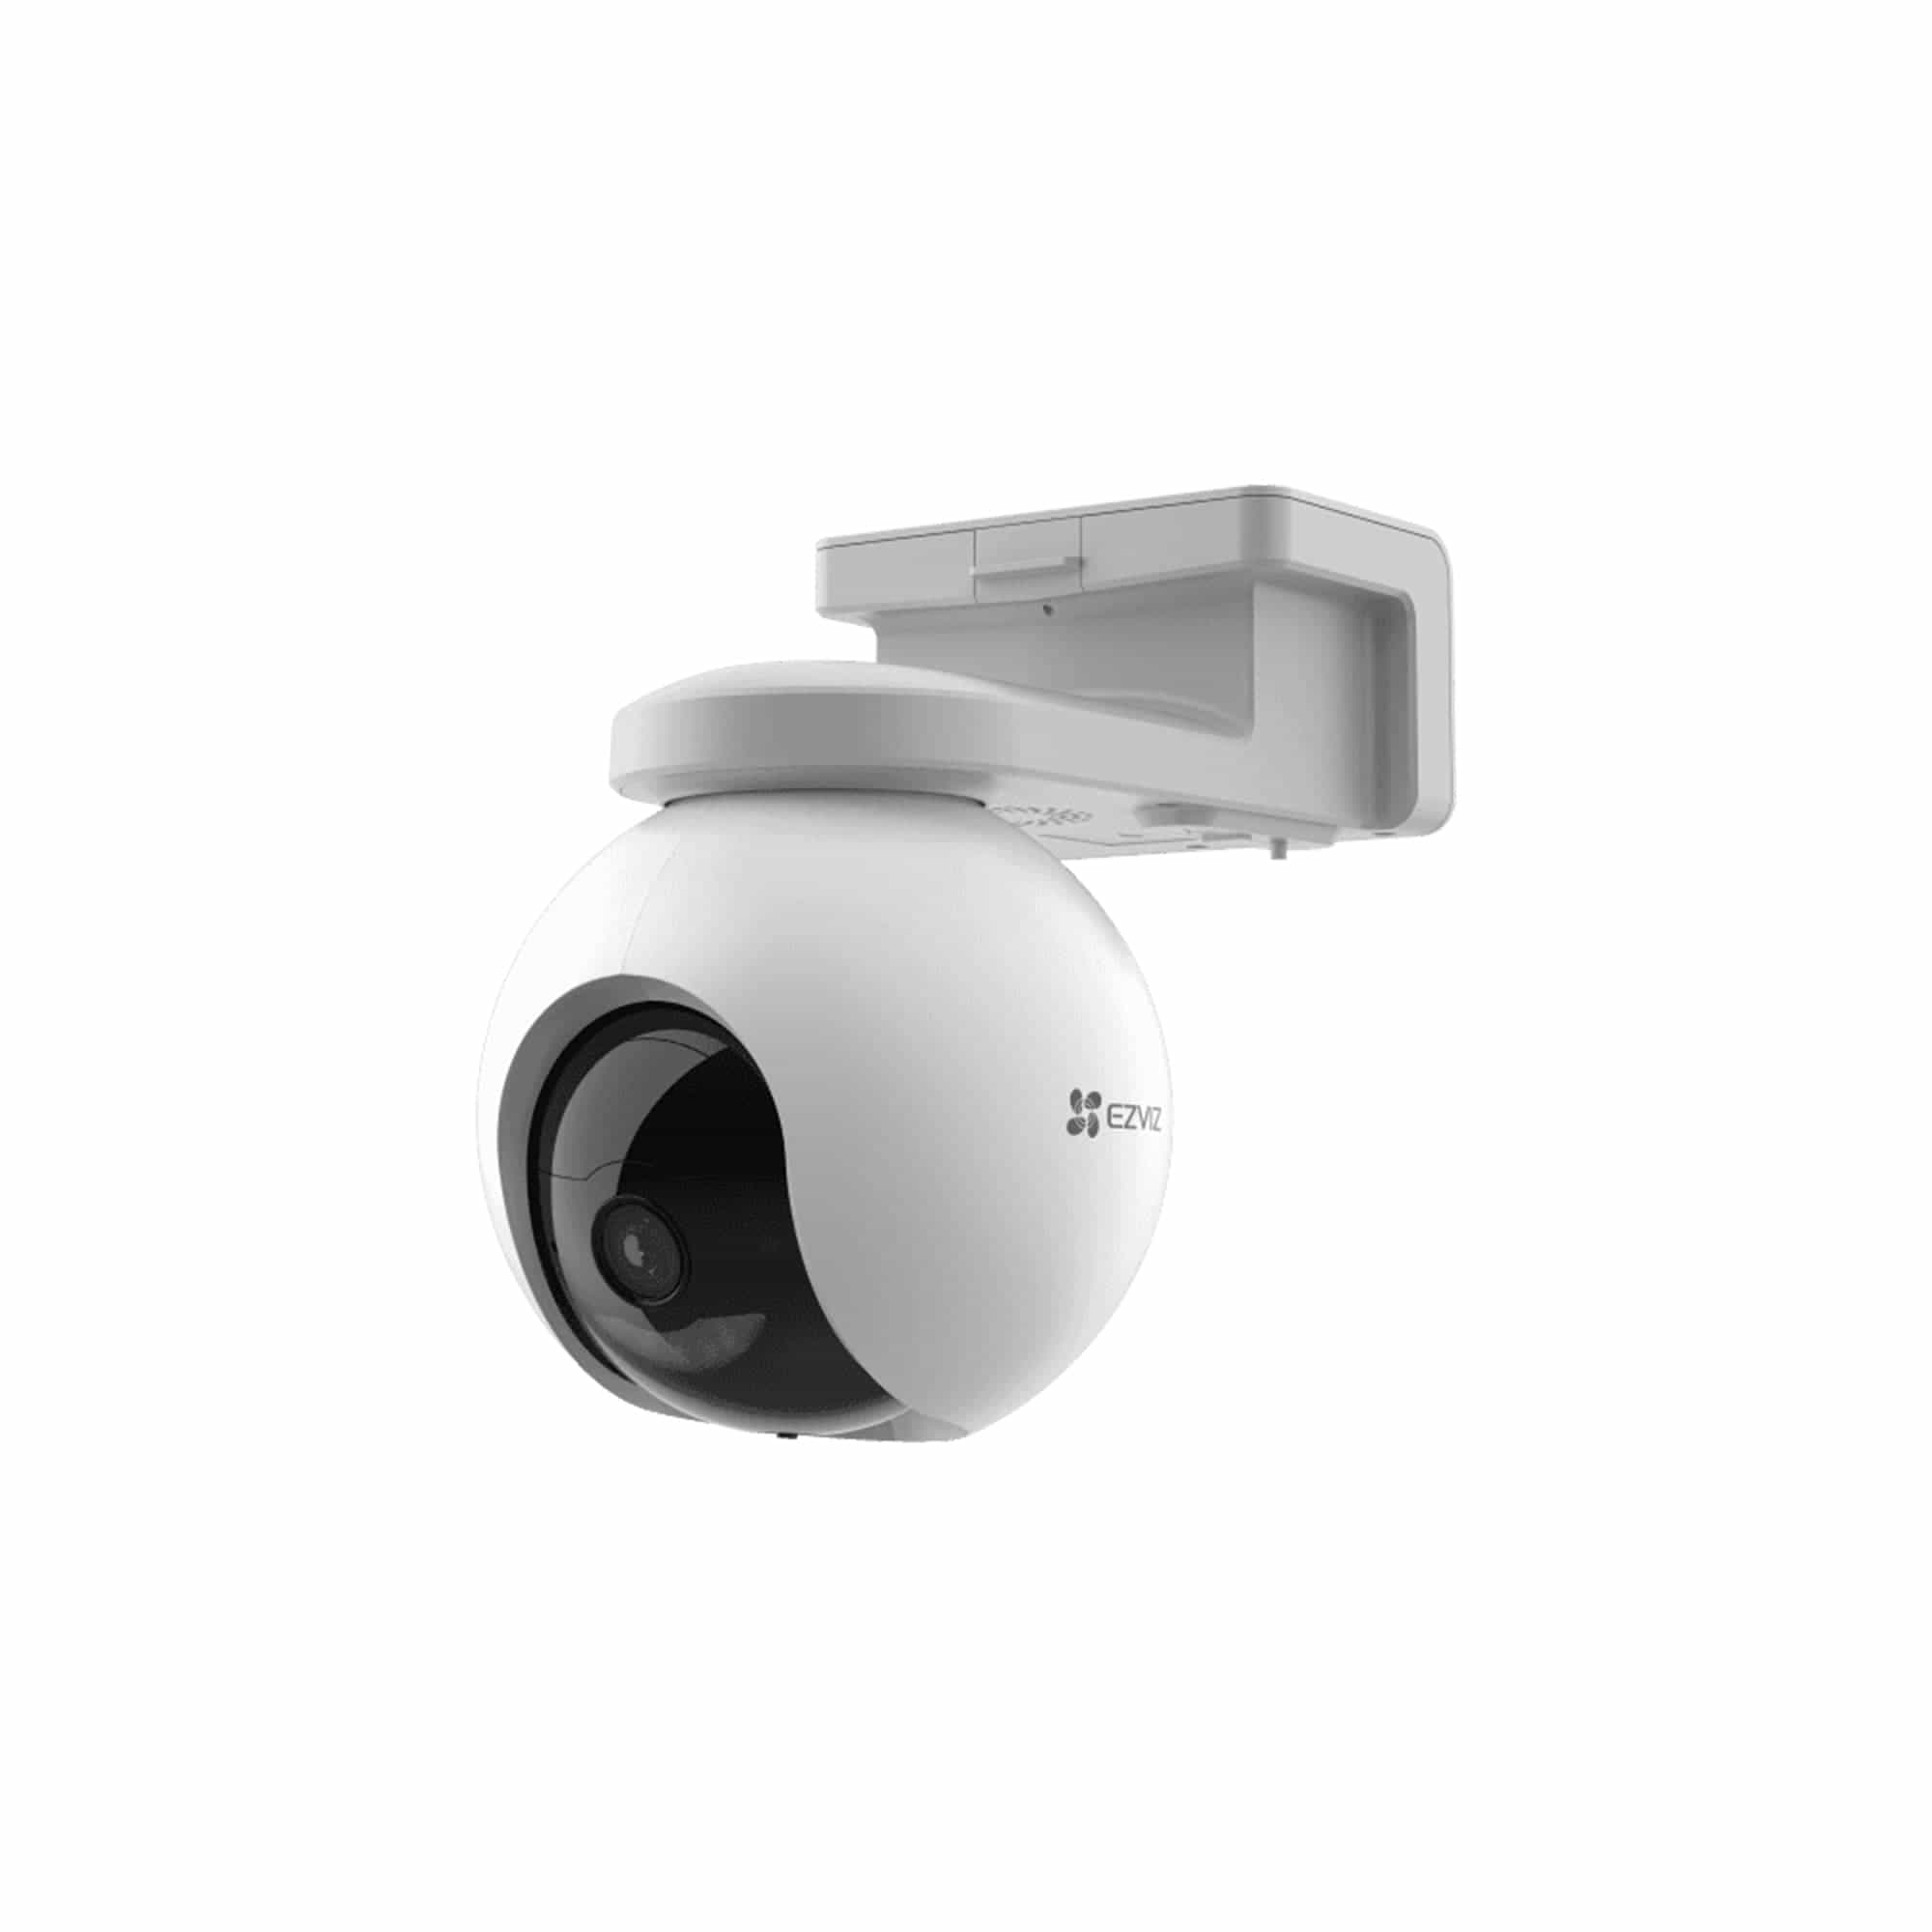  EZVIZ Outdoor Security Camera Dual Lens 1080P, Excellent Color  Night Vision, Active Light & Siren Alarm with PIR Motion Detection, Weather  Proof, Two-way Talk, the First Dual Lens Security Camera(C3X) 